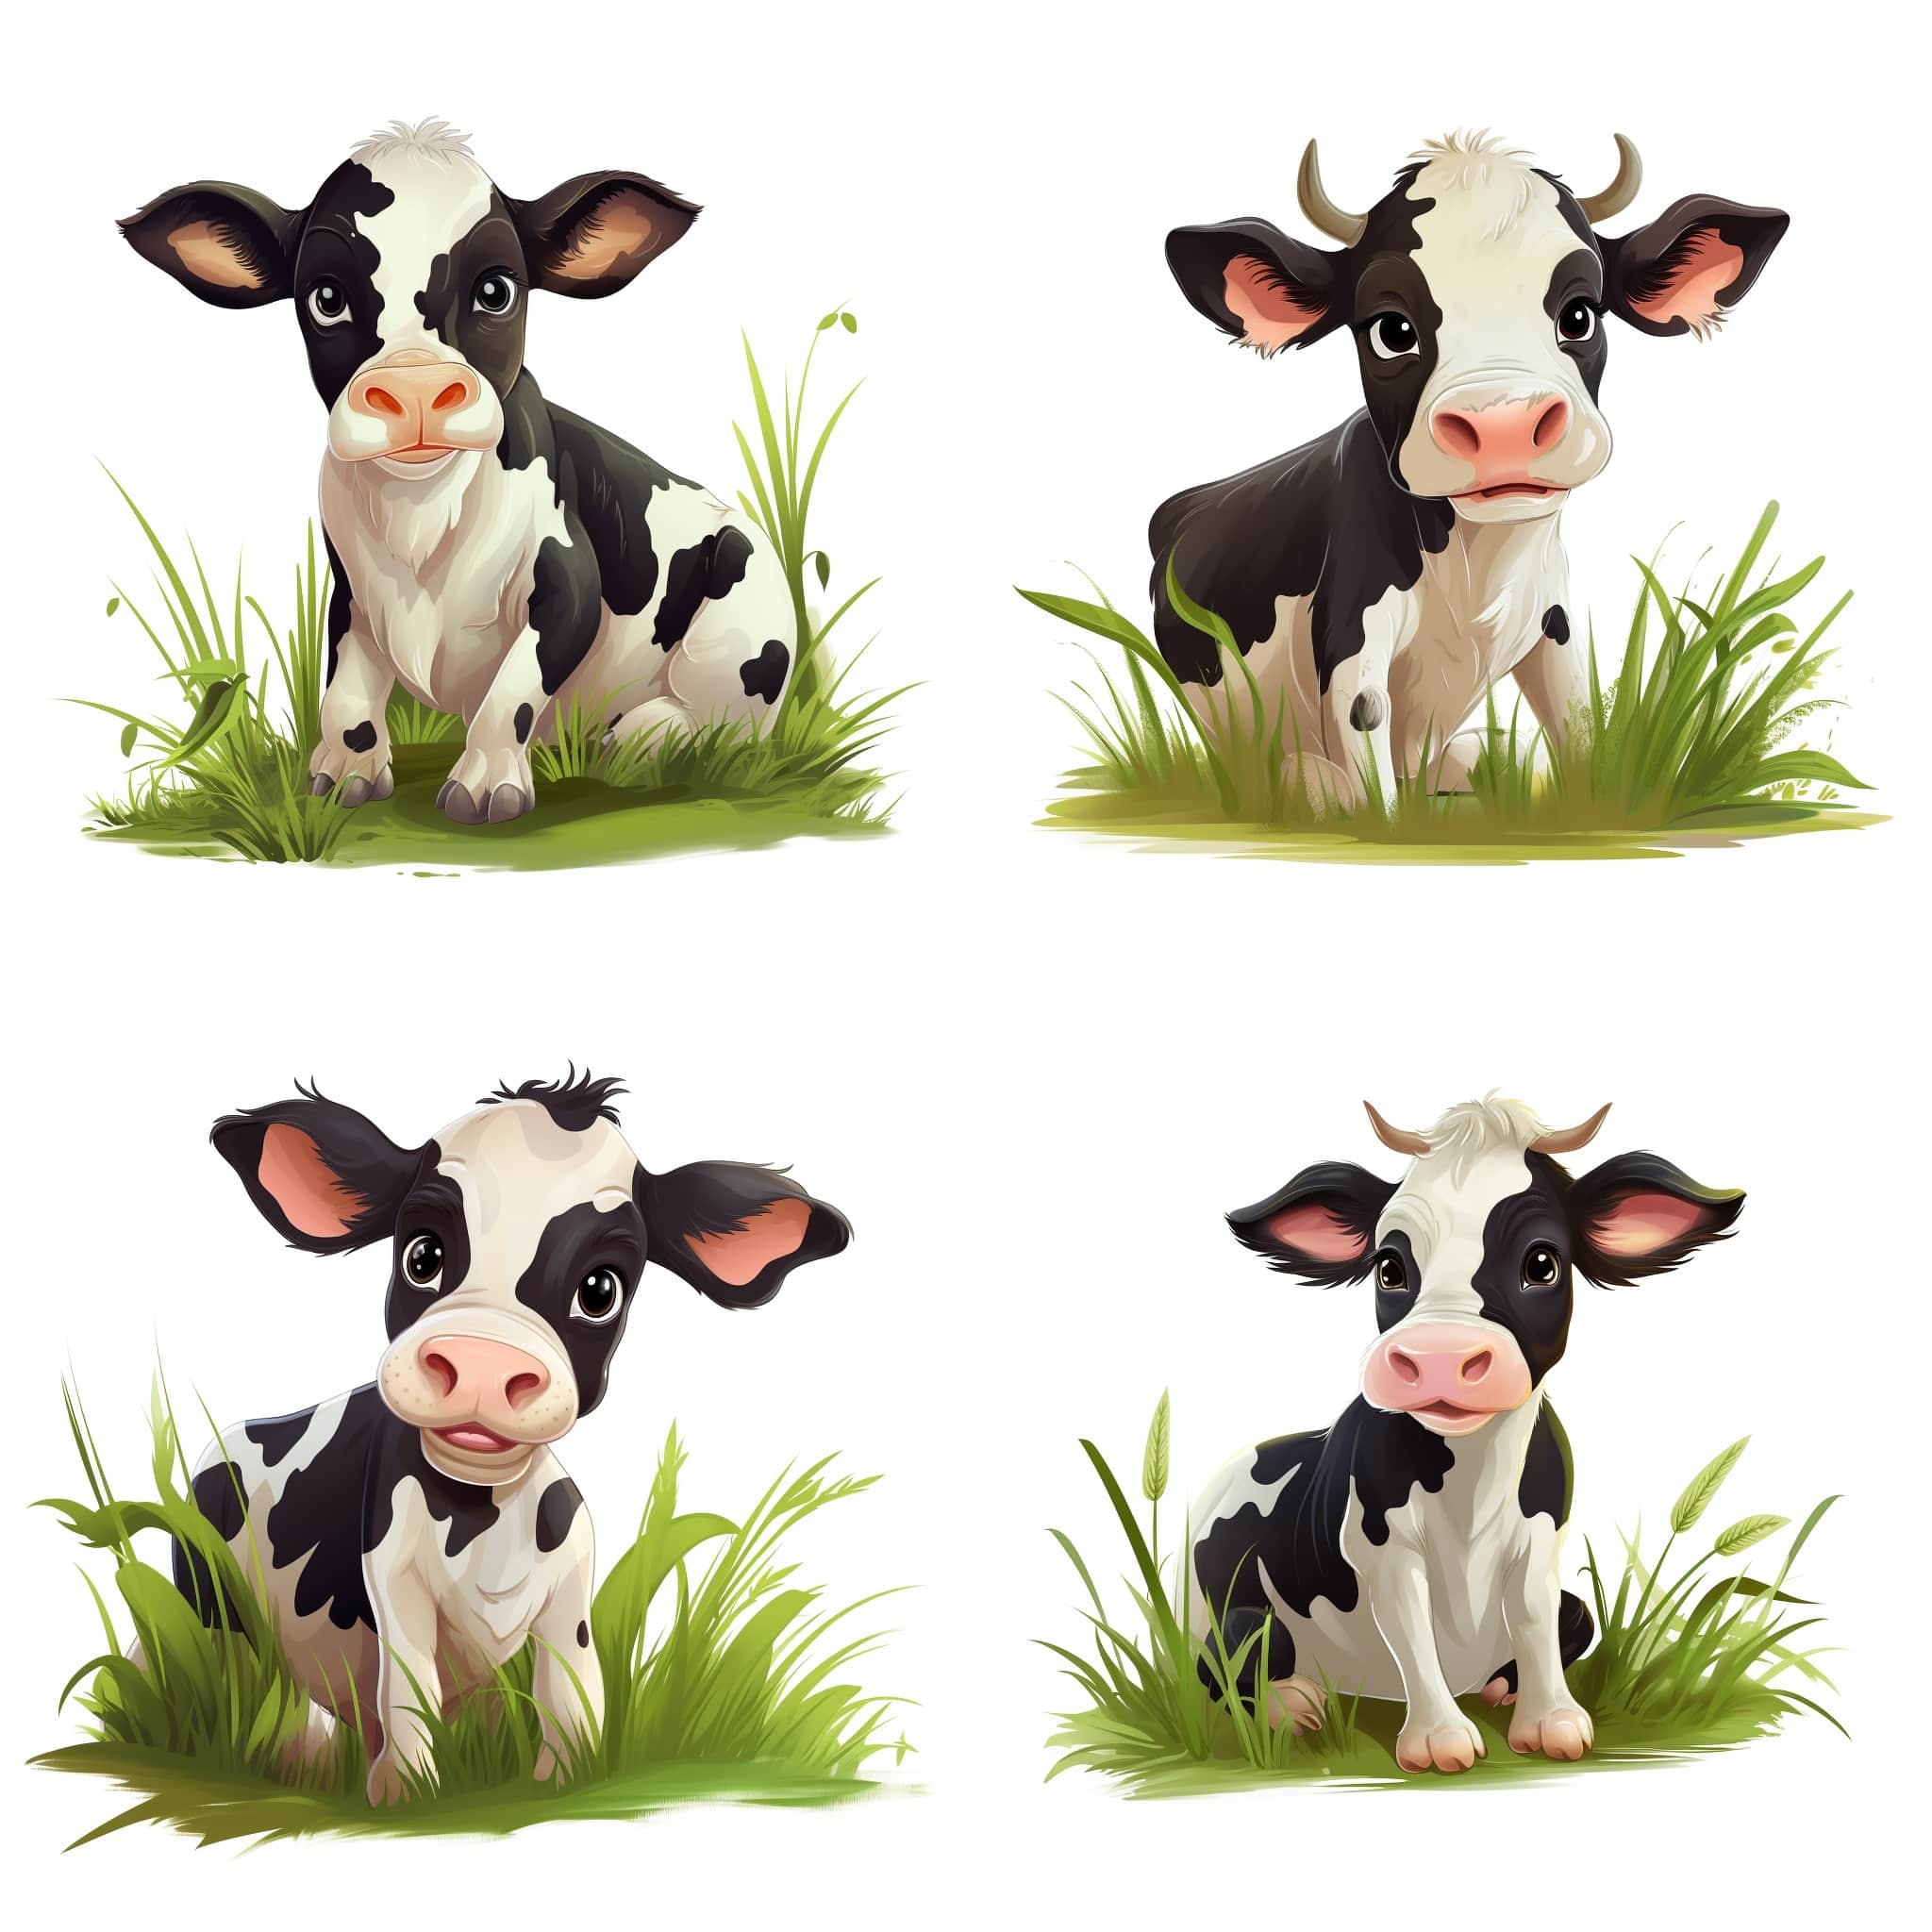 Midjourney prompt used: Cute cartoon cow eating grass, simple white background